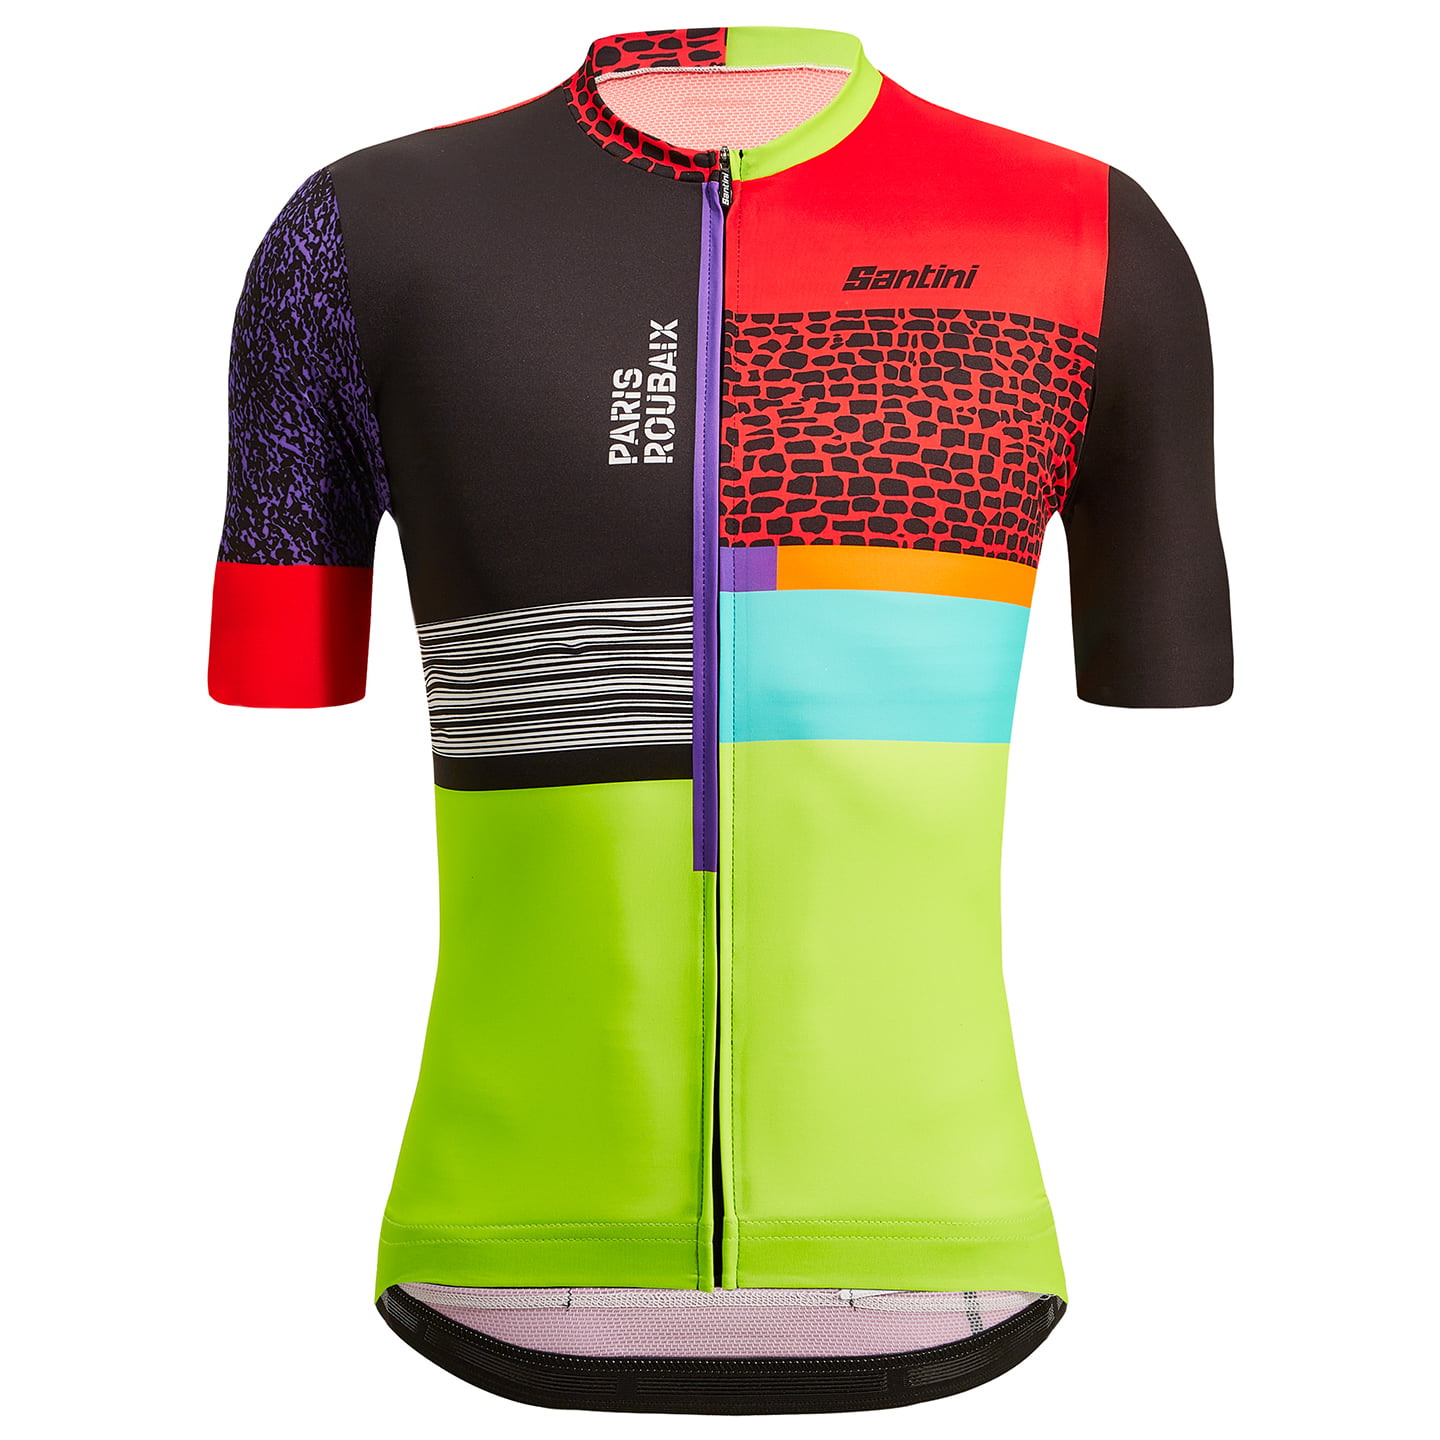 SANTINI Paris-Roubaix Forgers des Heroes 2023 Short Sleeve Jersey, for men, size S, Cycling jersey, Cycling clothing